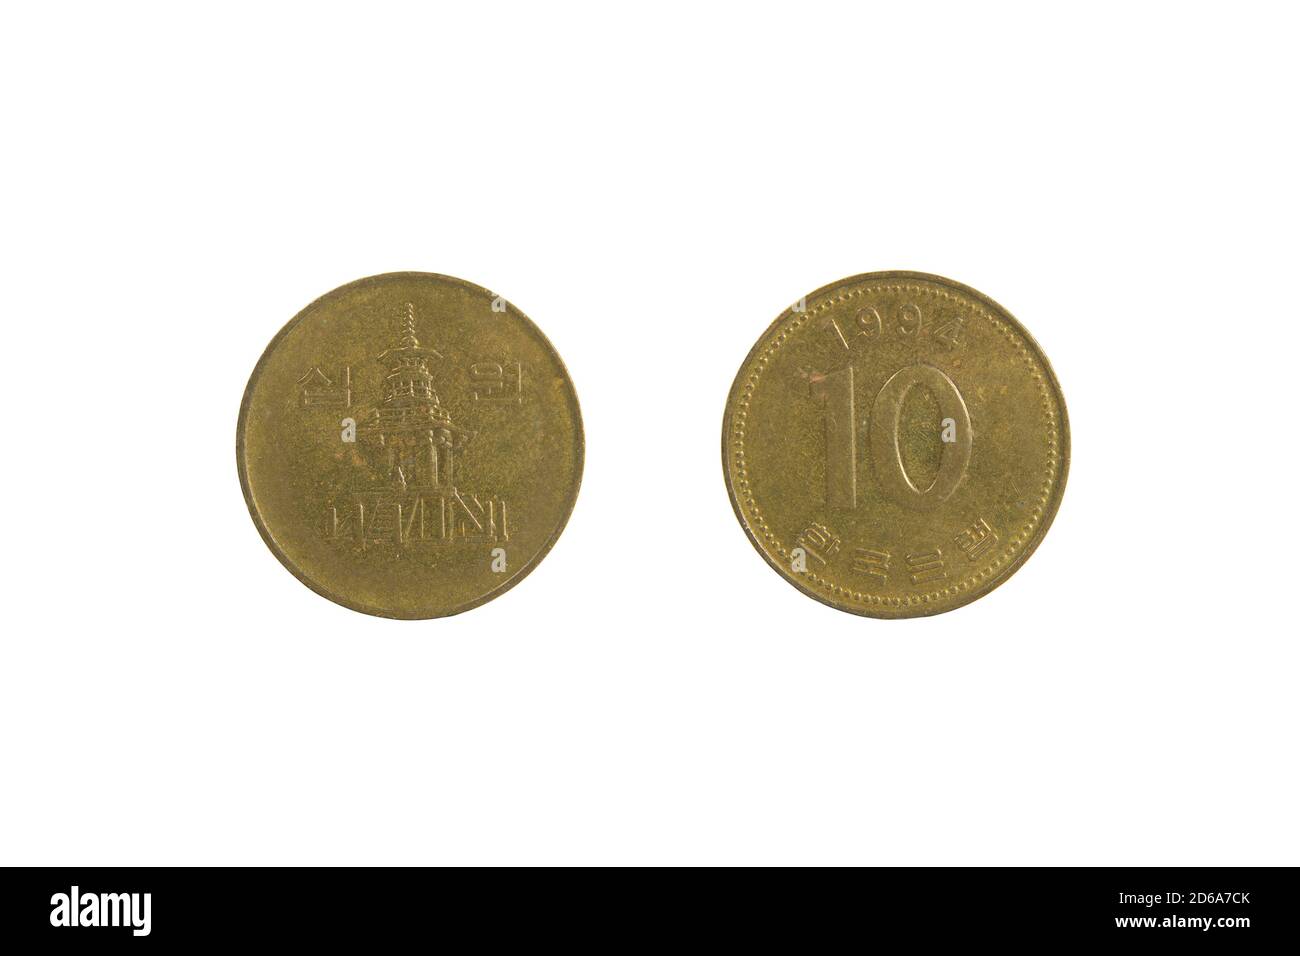 Close up of an old worn South Korean won coin, front and back. Isolated on white. Stock Photo